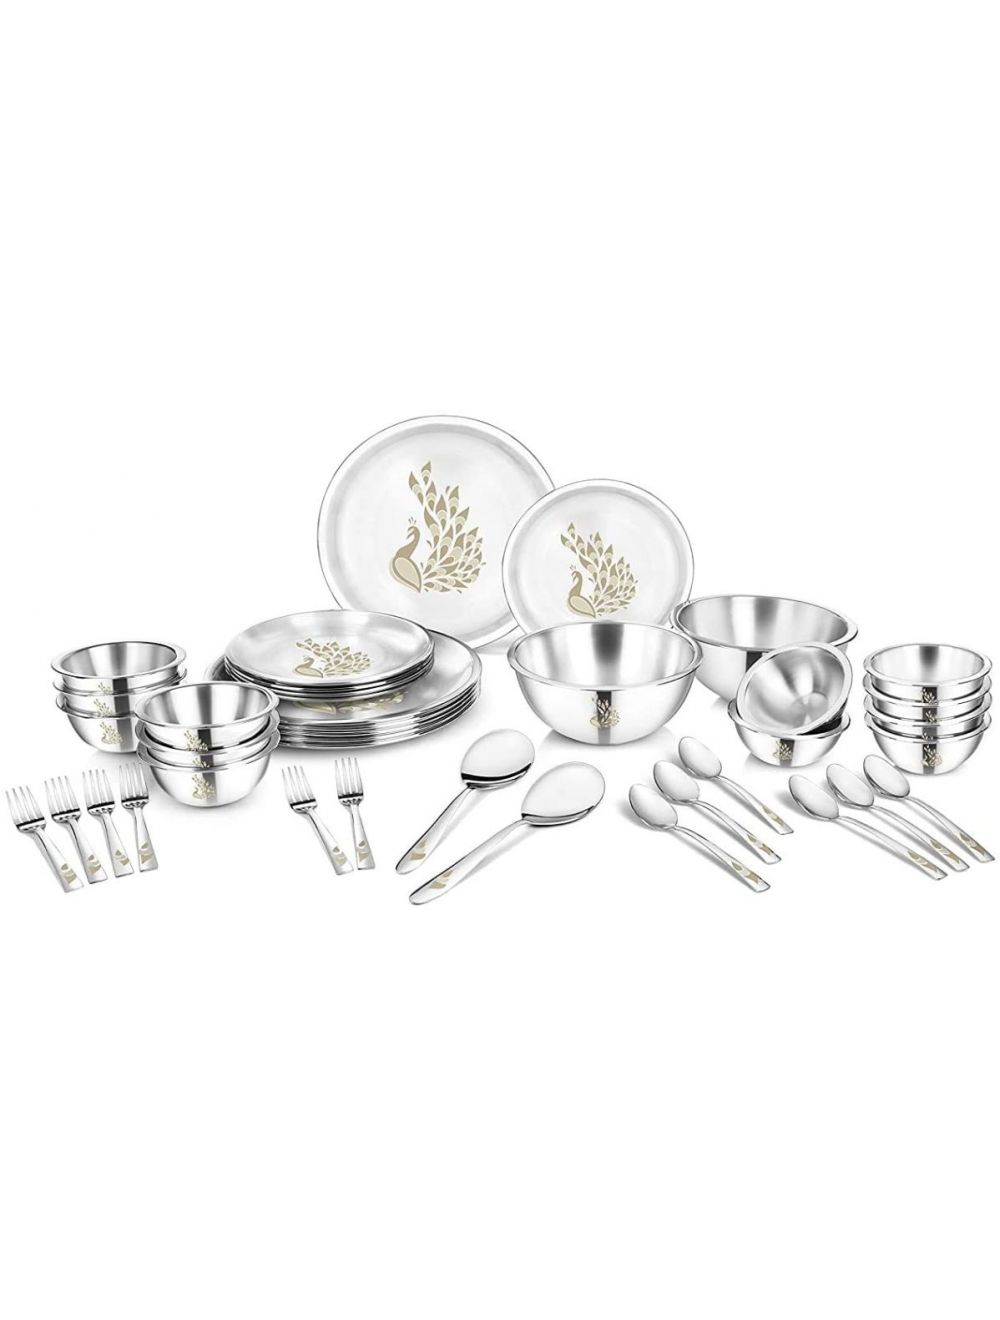 Classic Essentials 40 pcs Stainless Steel Double Walled with Permanent Peacock Laser Design Dinner Set